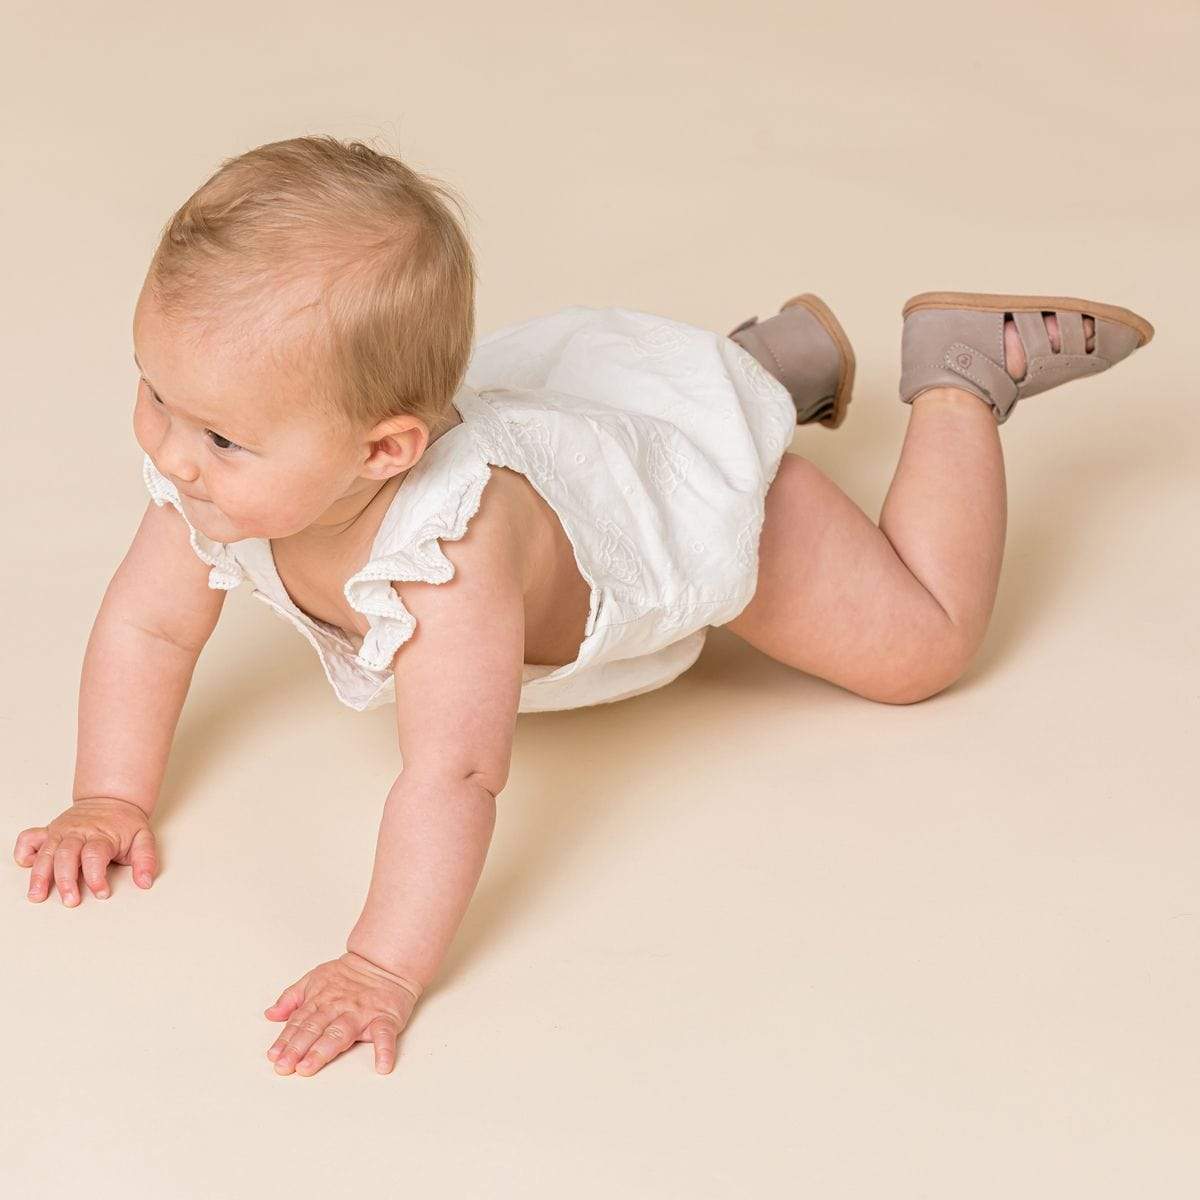 Pretty Brave Baby Shoes Charlie Sandal in Taupe